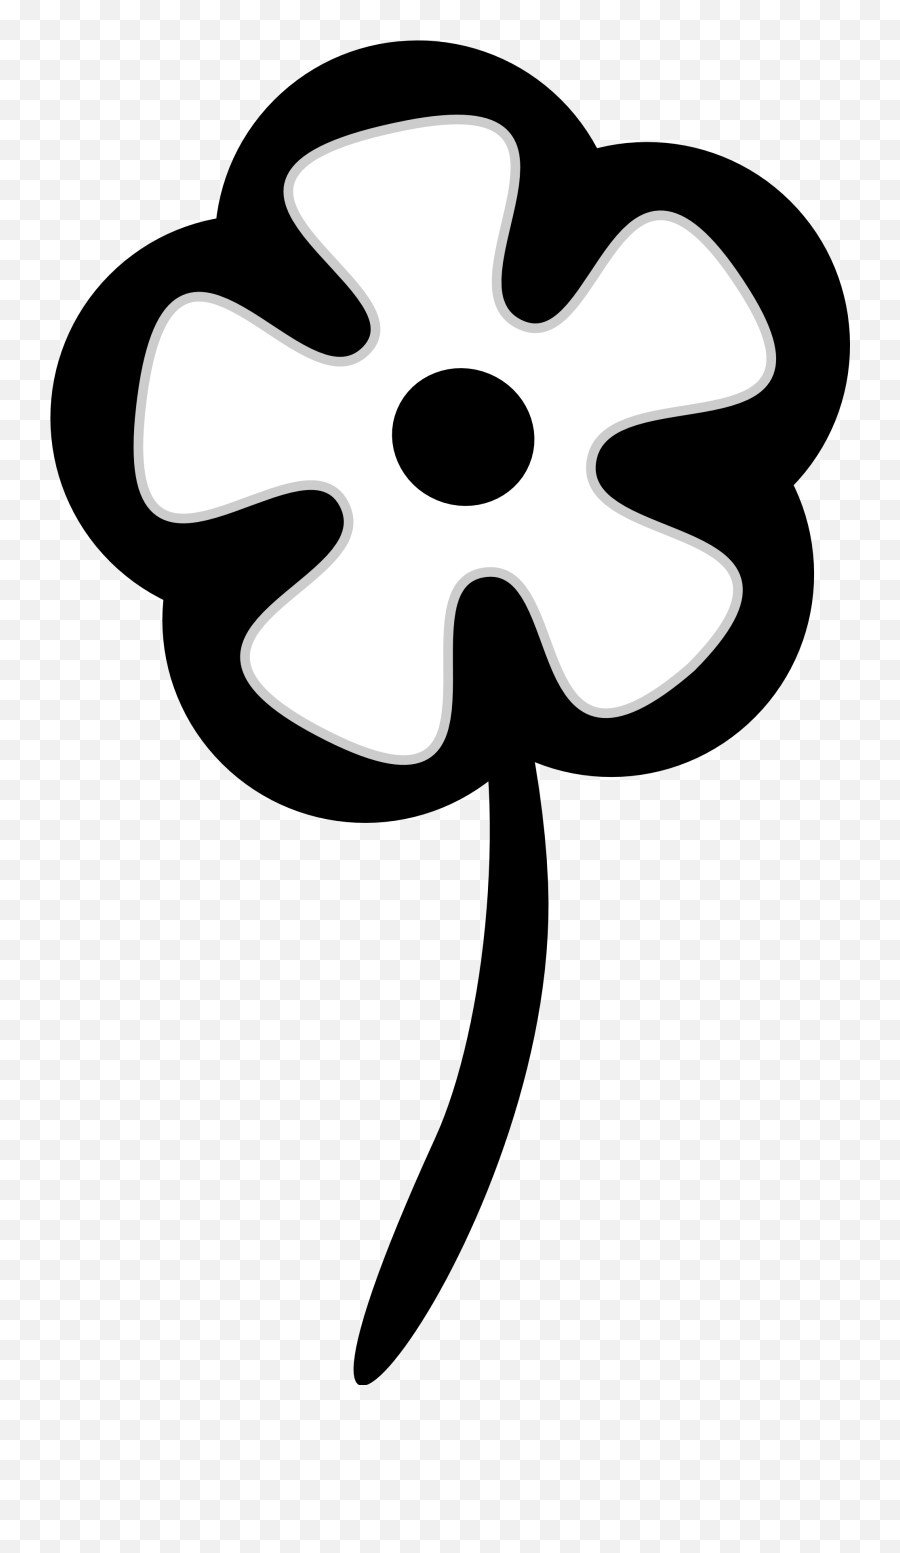 Stock Flower Black And White Png - Flower Graphic Black And White Emoji,Black And White Flower Emoji